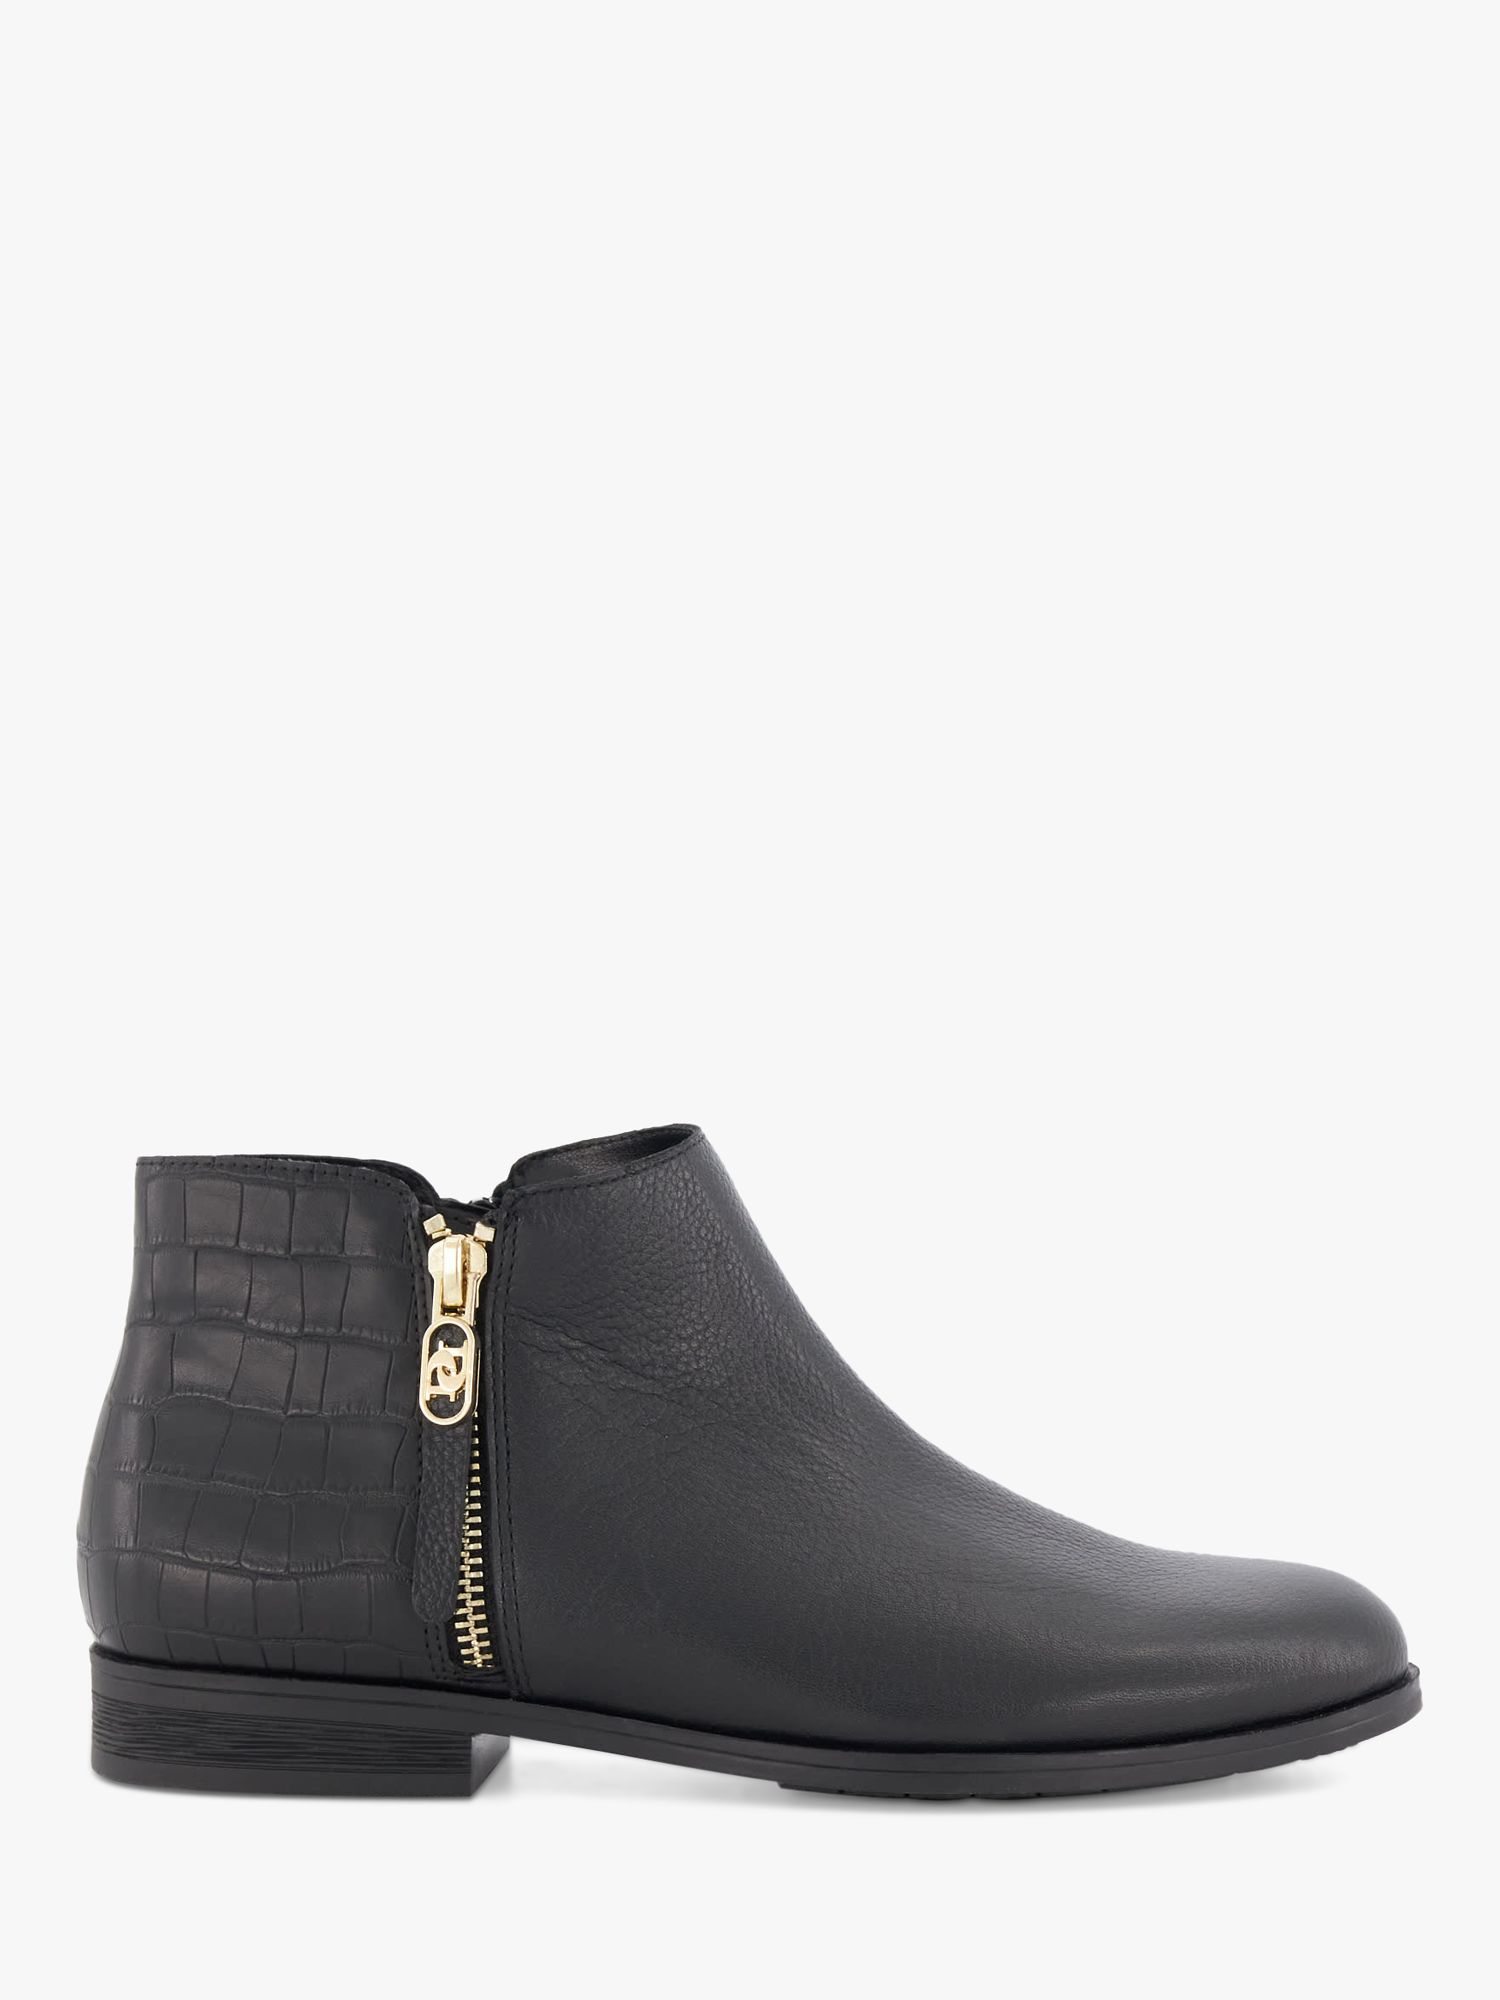 Dune Pond Leather Ankle Boots, Black at John Lewis & Partners